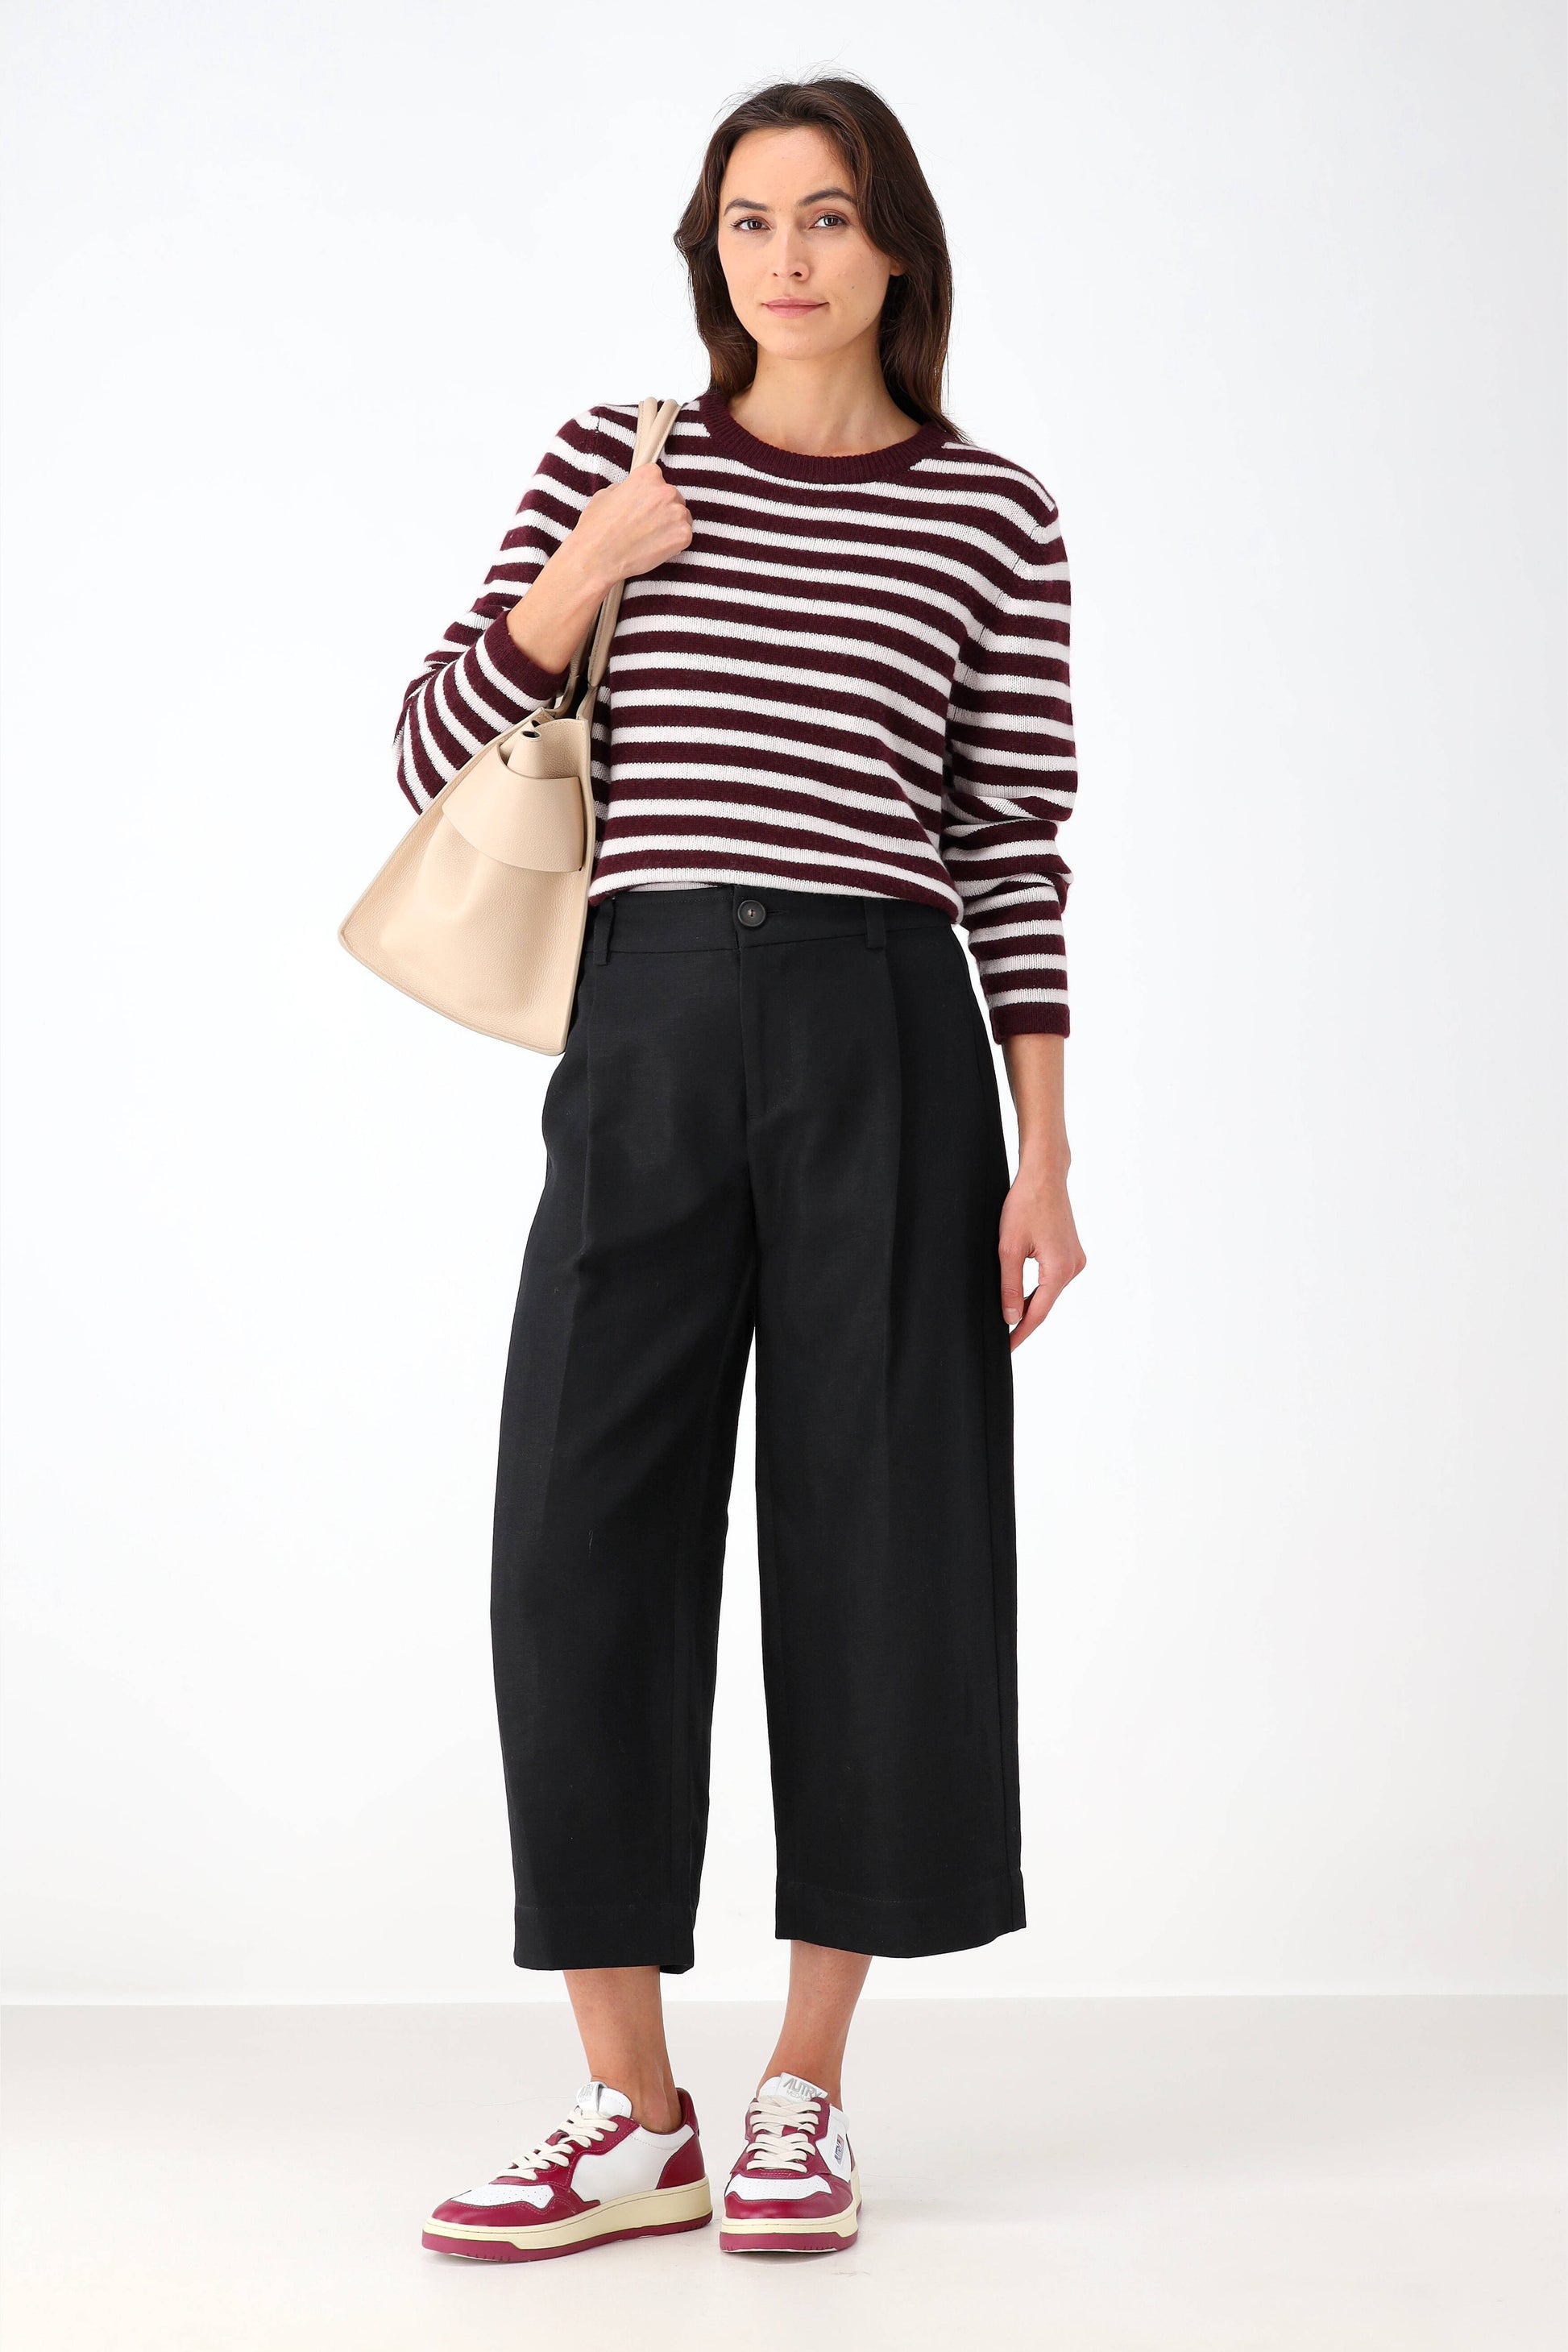 Hose Cropped Casual in SchwarzVince - Anita Hass